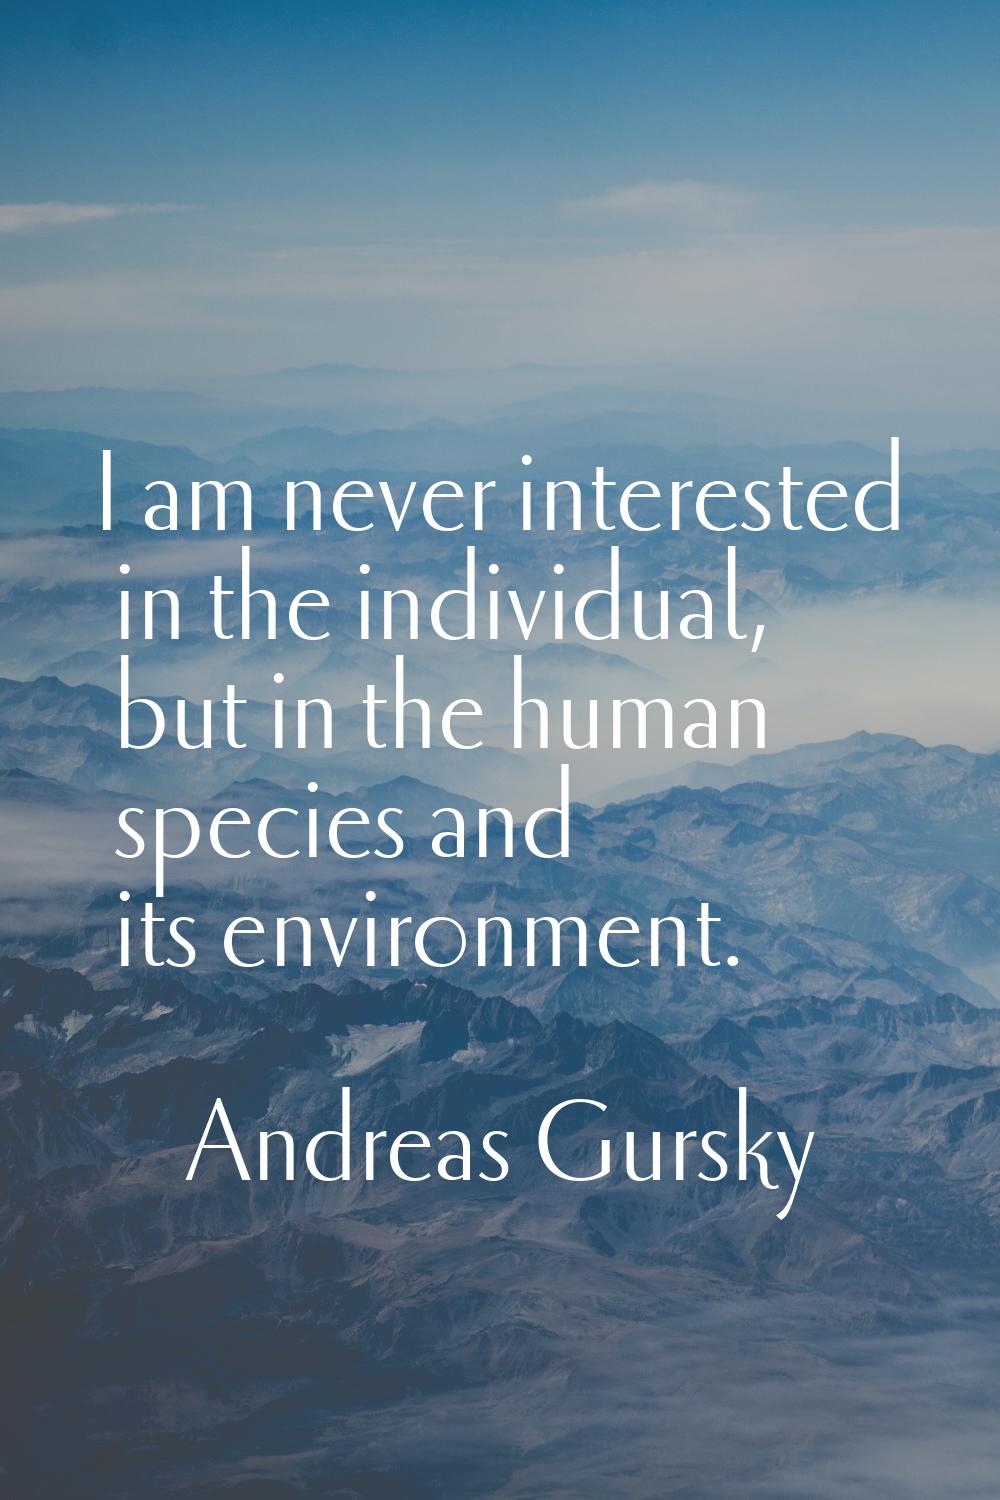 I am never interested in the individual, but in the human species and its environment.